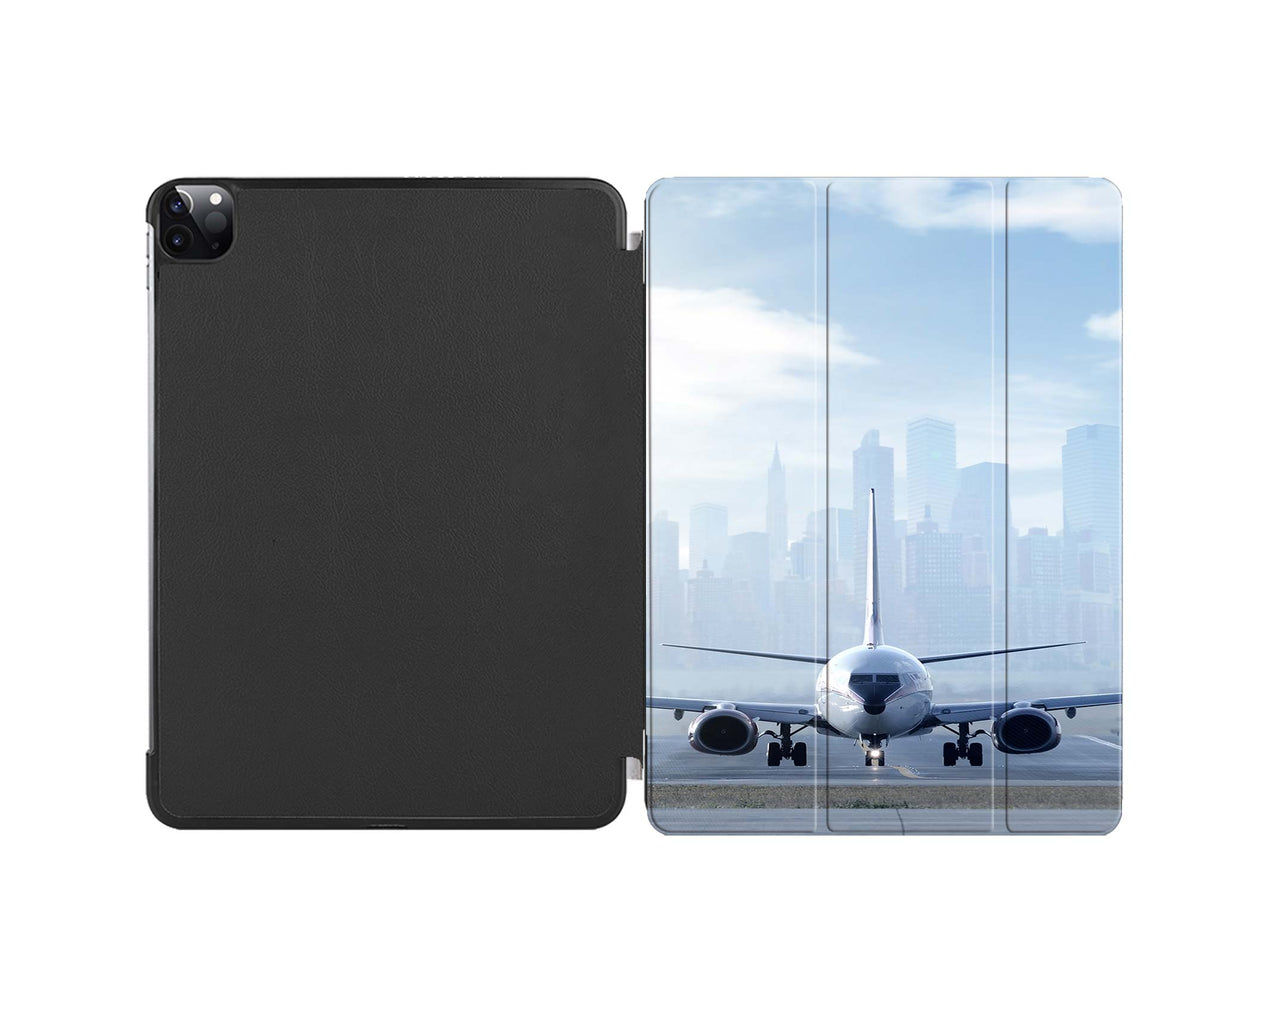 Boeing 737 & City View Behind copy Designed iPad Cases